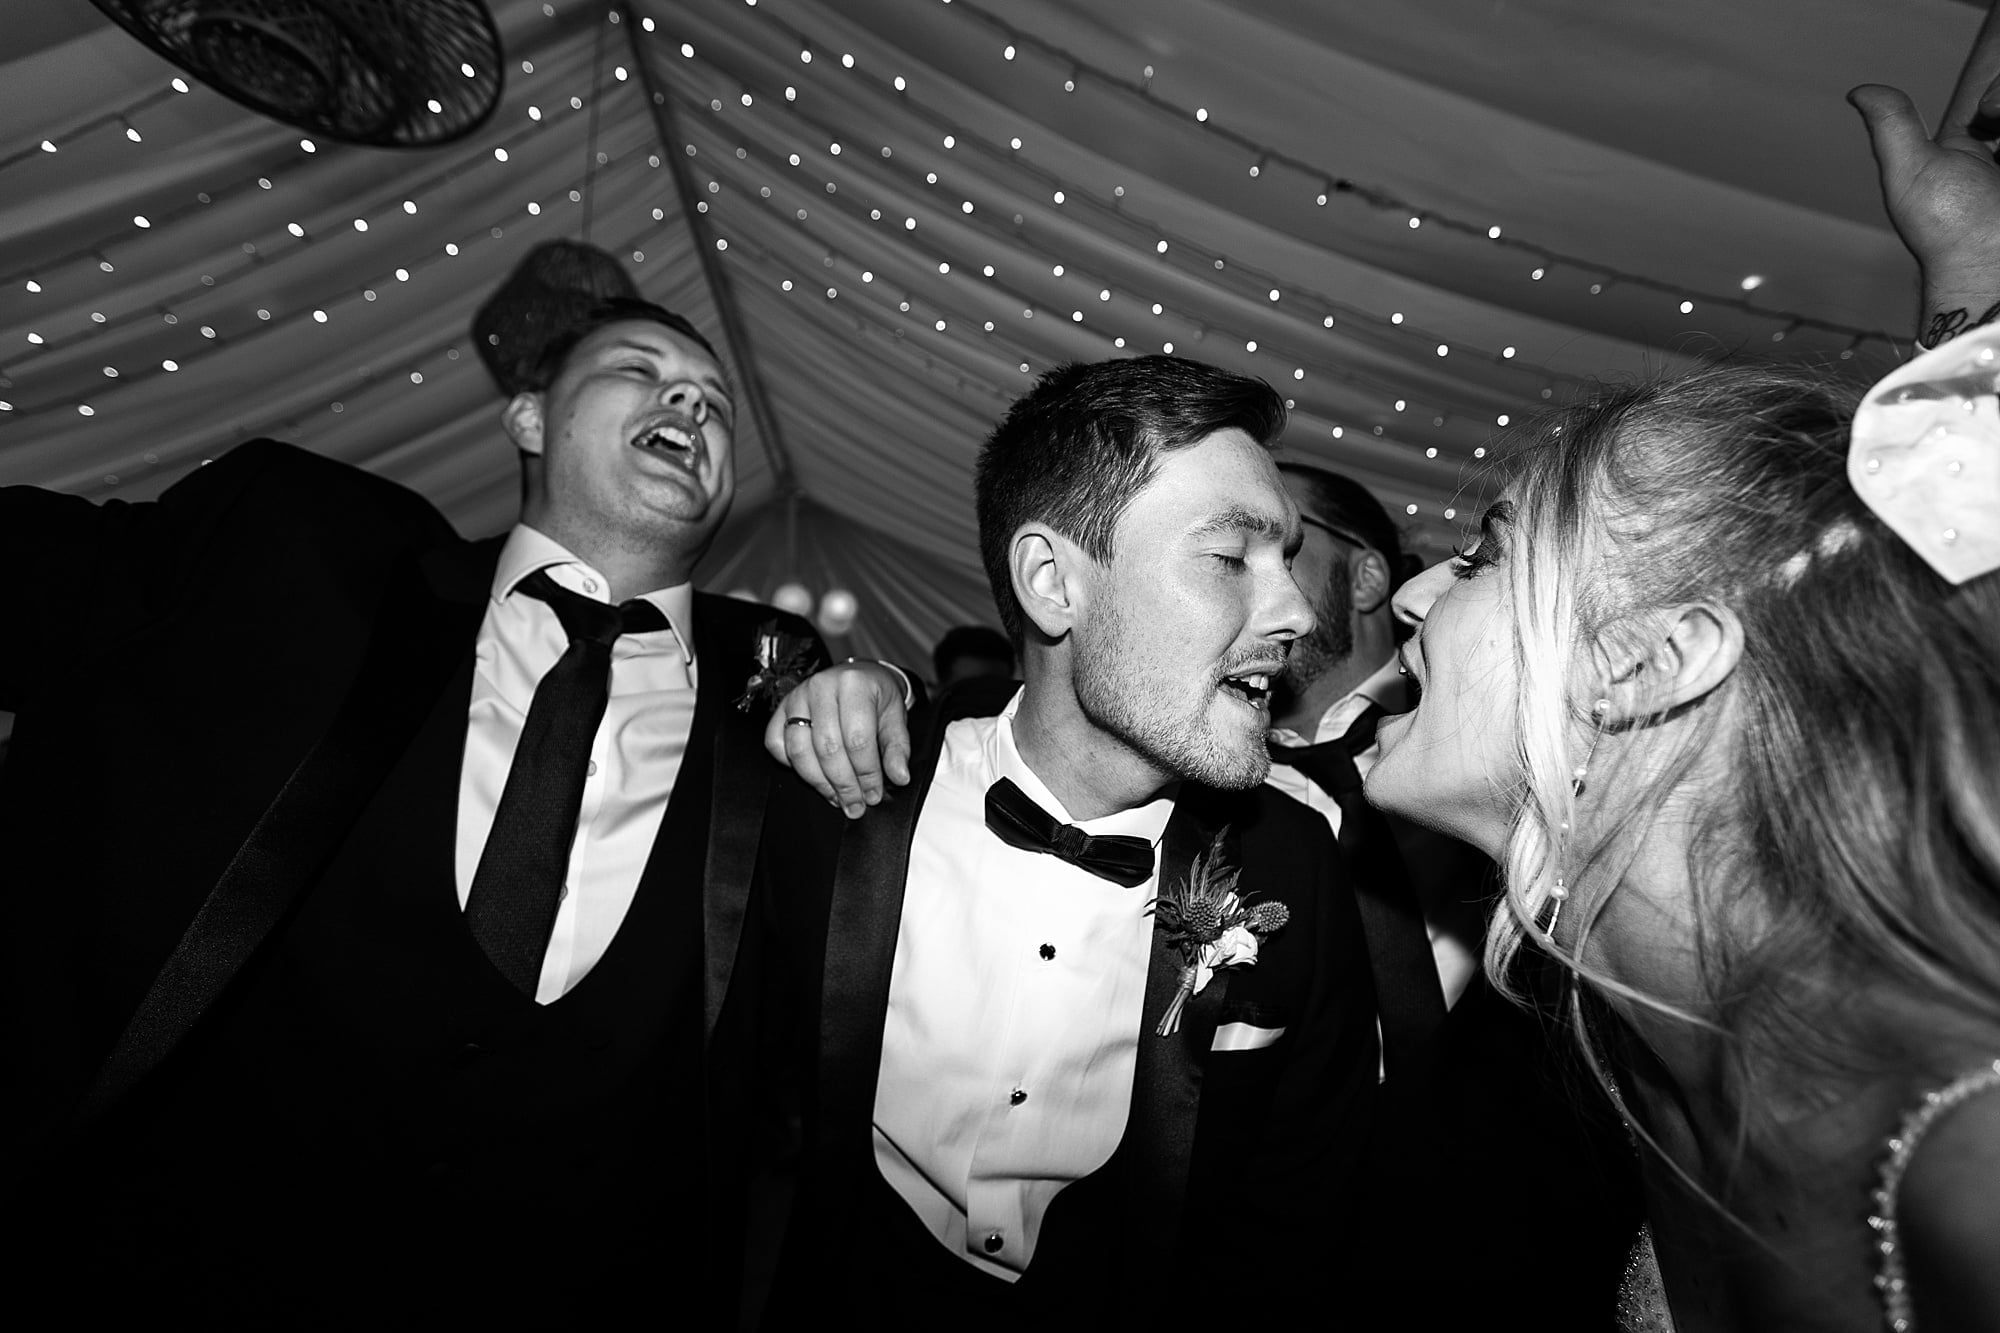 high wards estate marquee wedding reception first dance bride and groom party